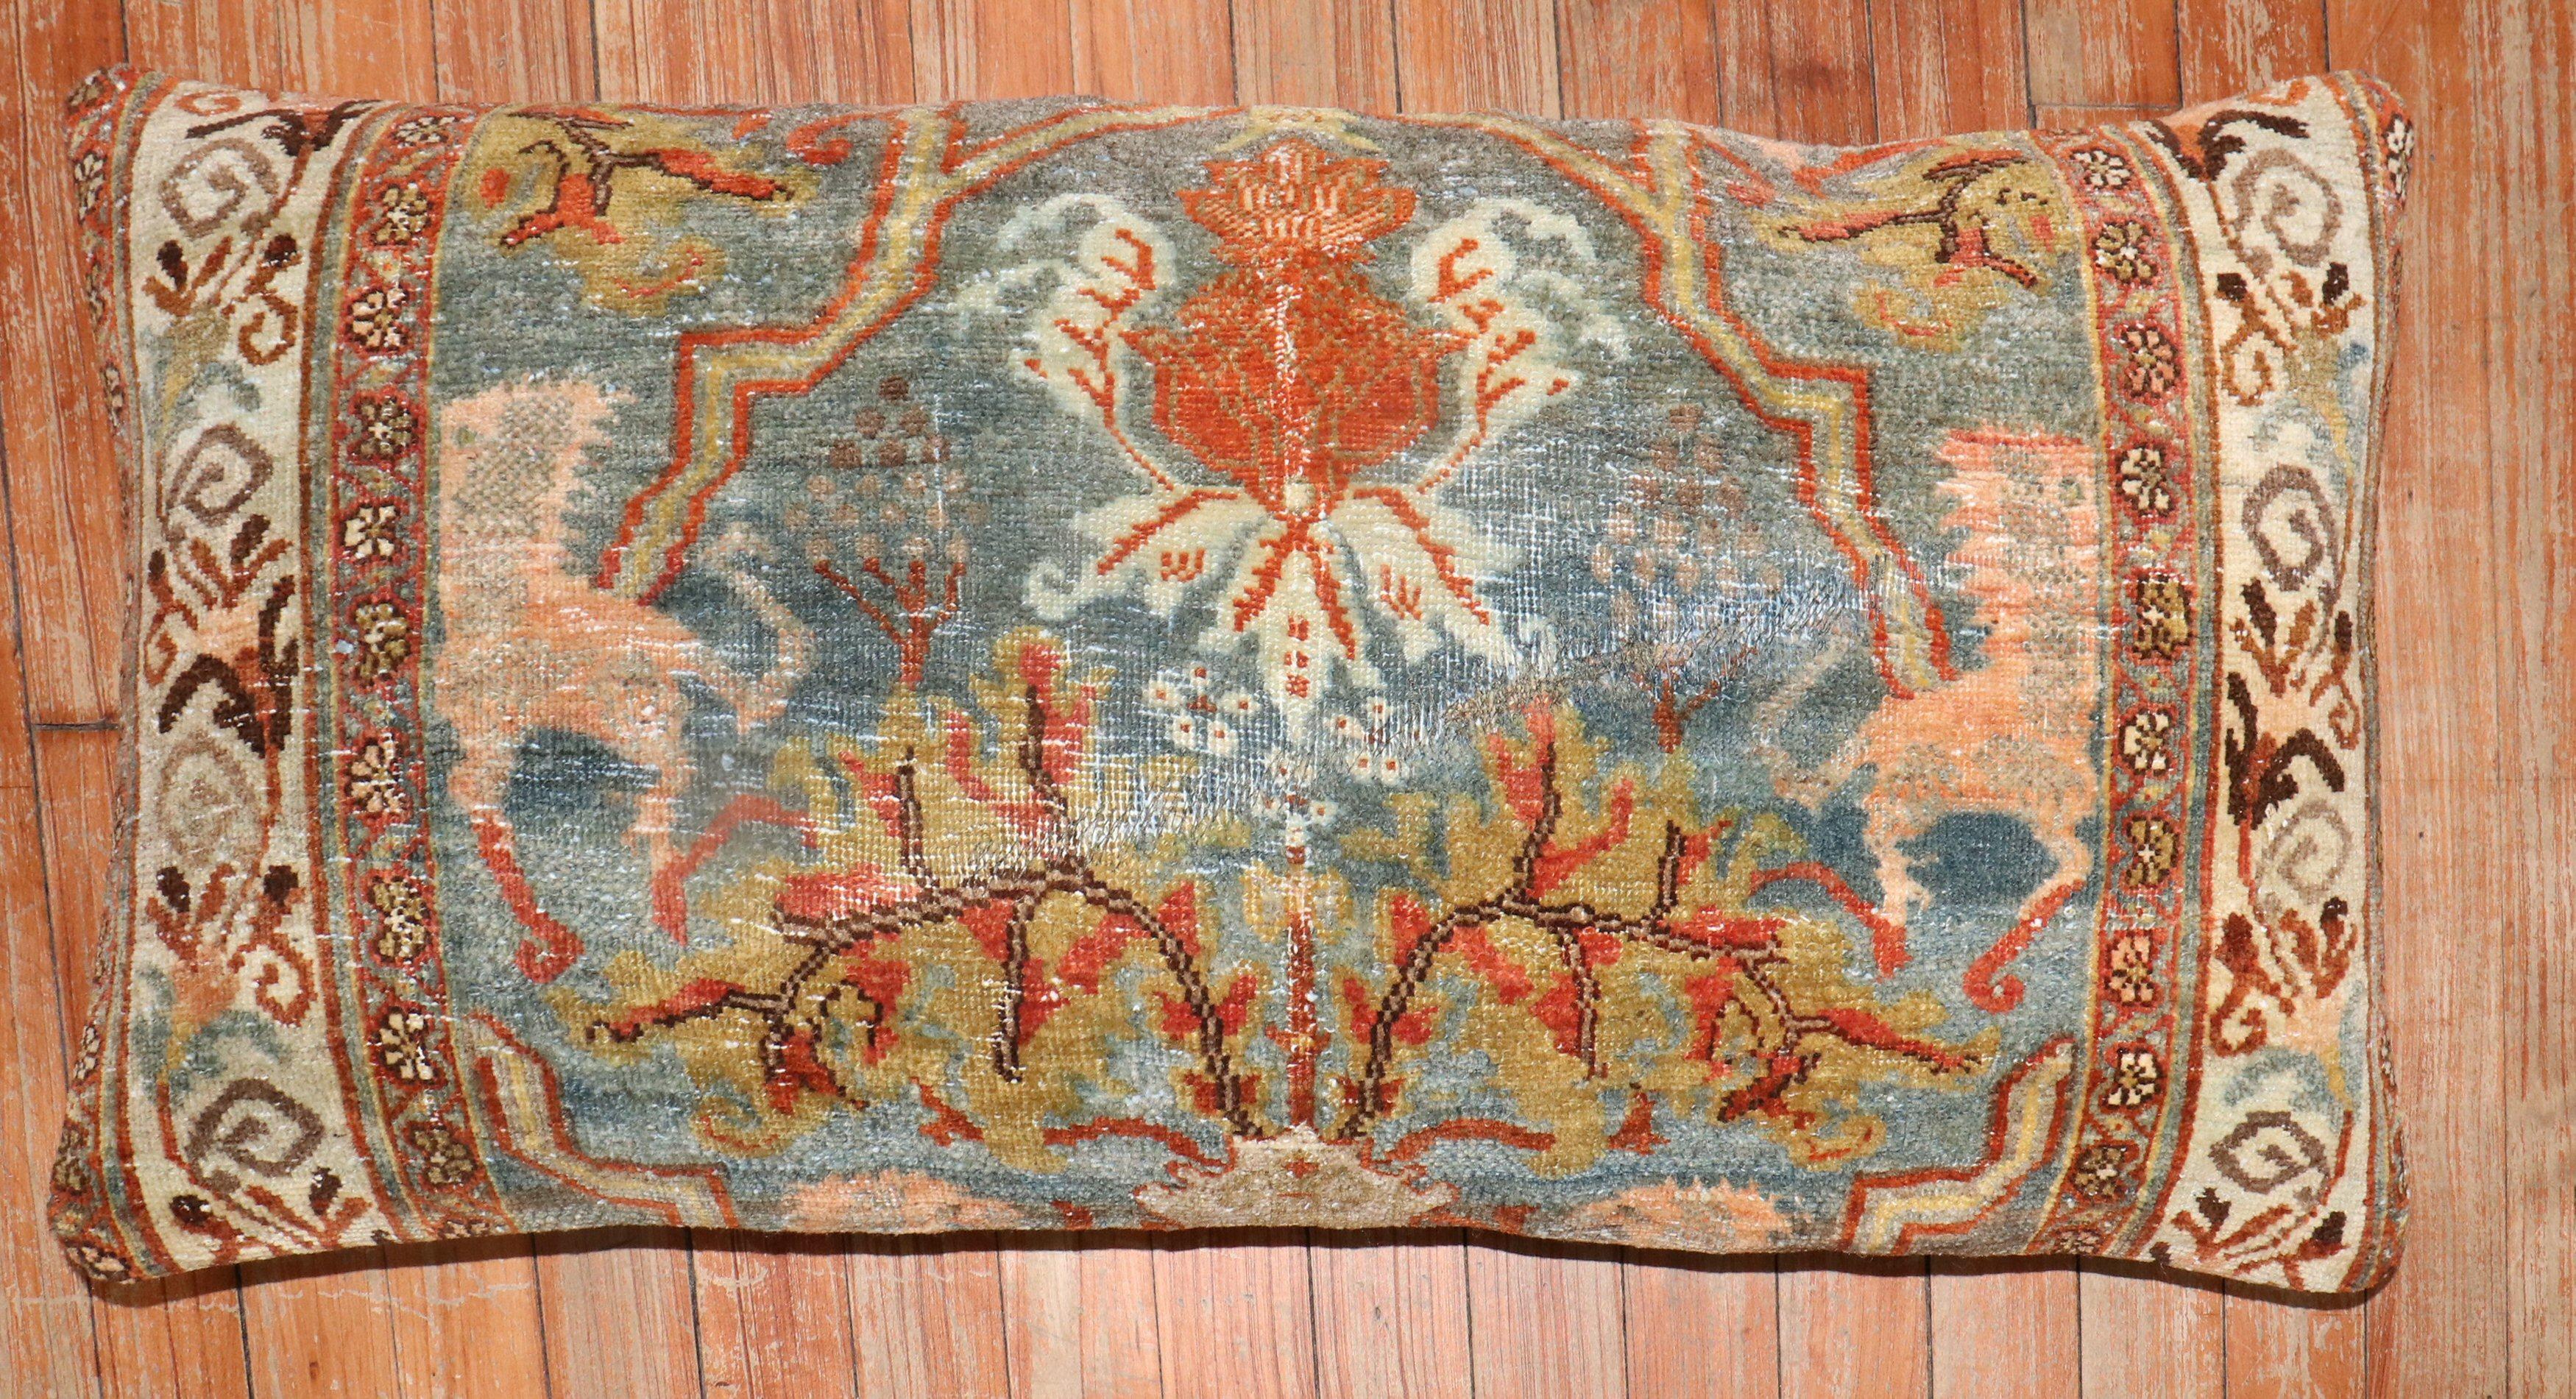 Pillow made from a late 19th century Persian Bidjar rug with a pictorial design. 

Measures: 16'' x 32''.